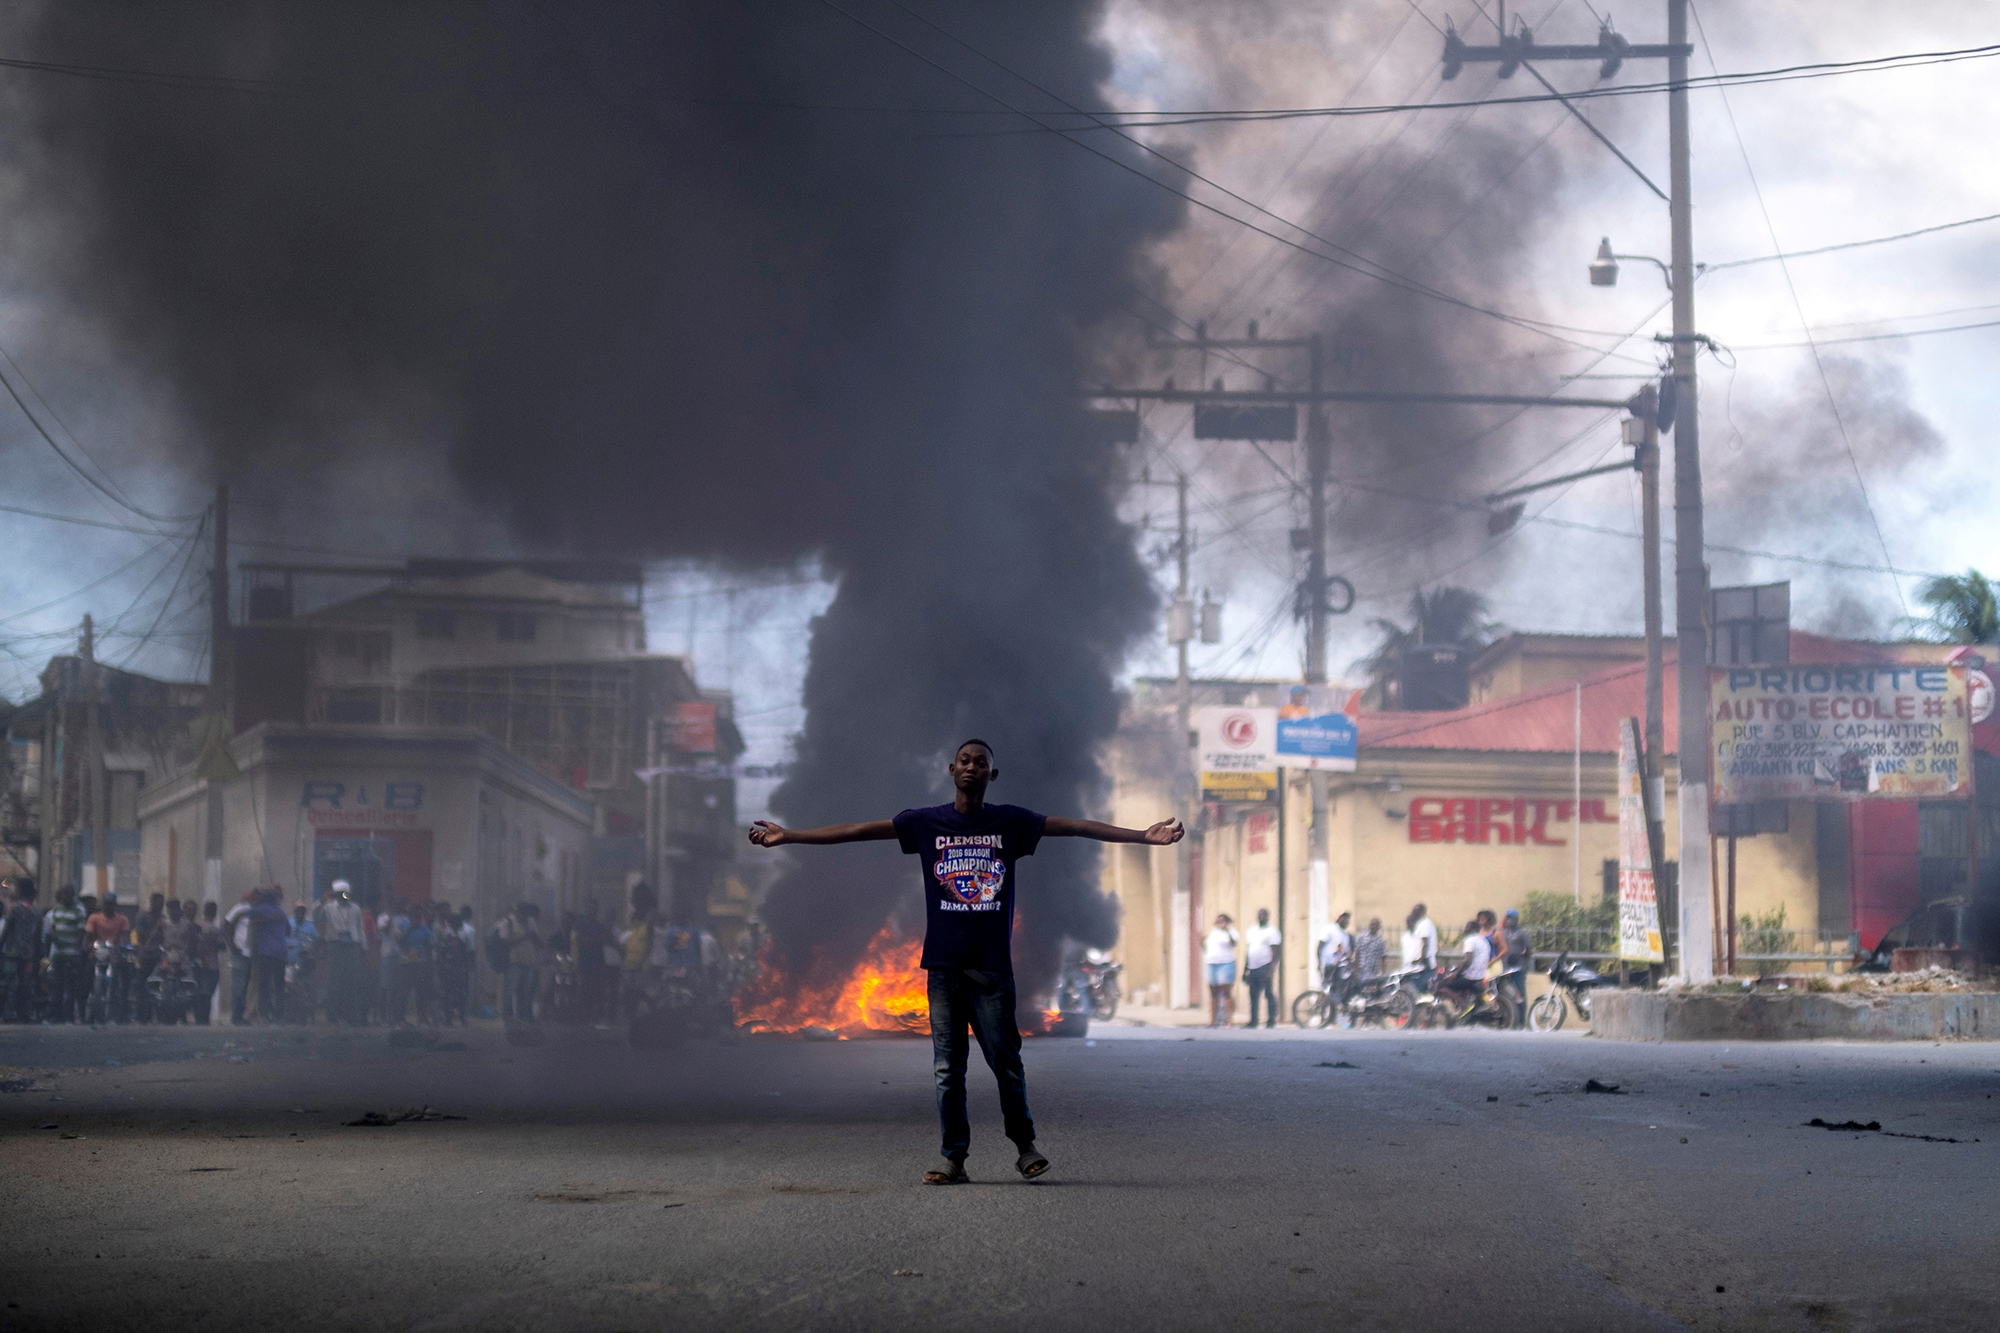 A young man wearing a black t-shirt and jeans stands in front a burning barricade in a street.